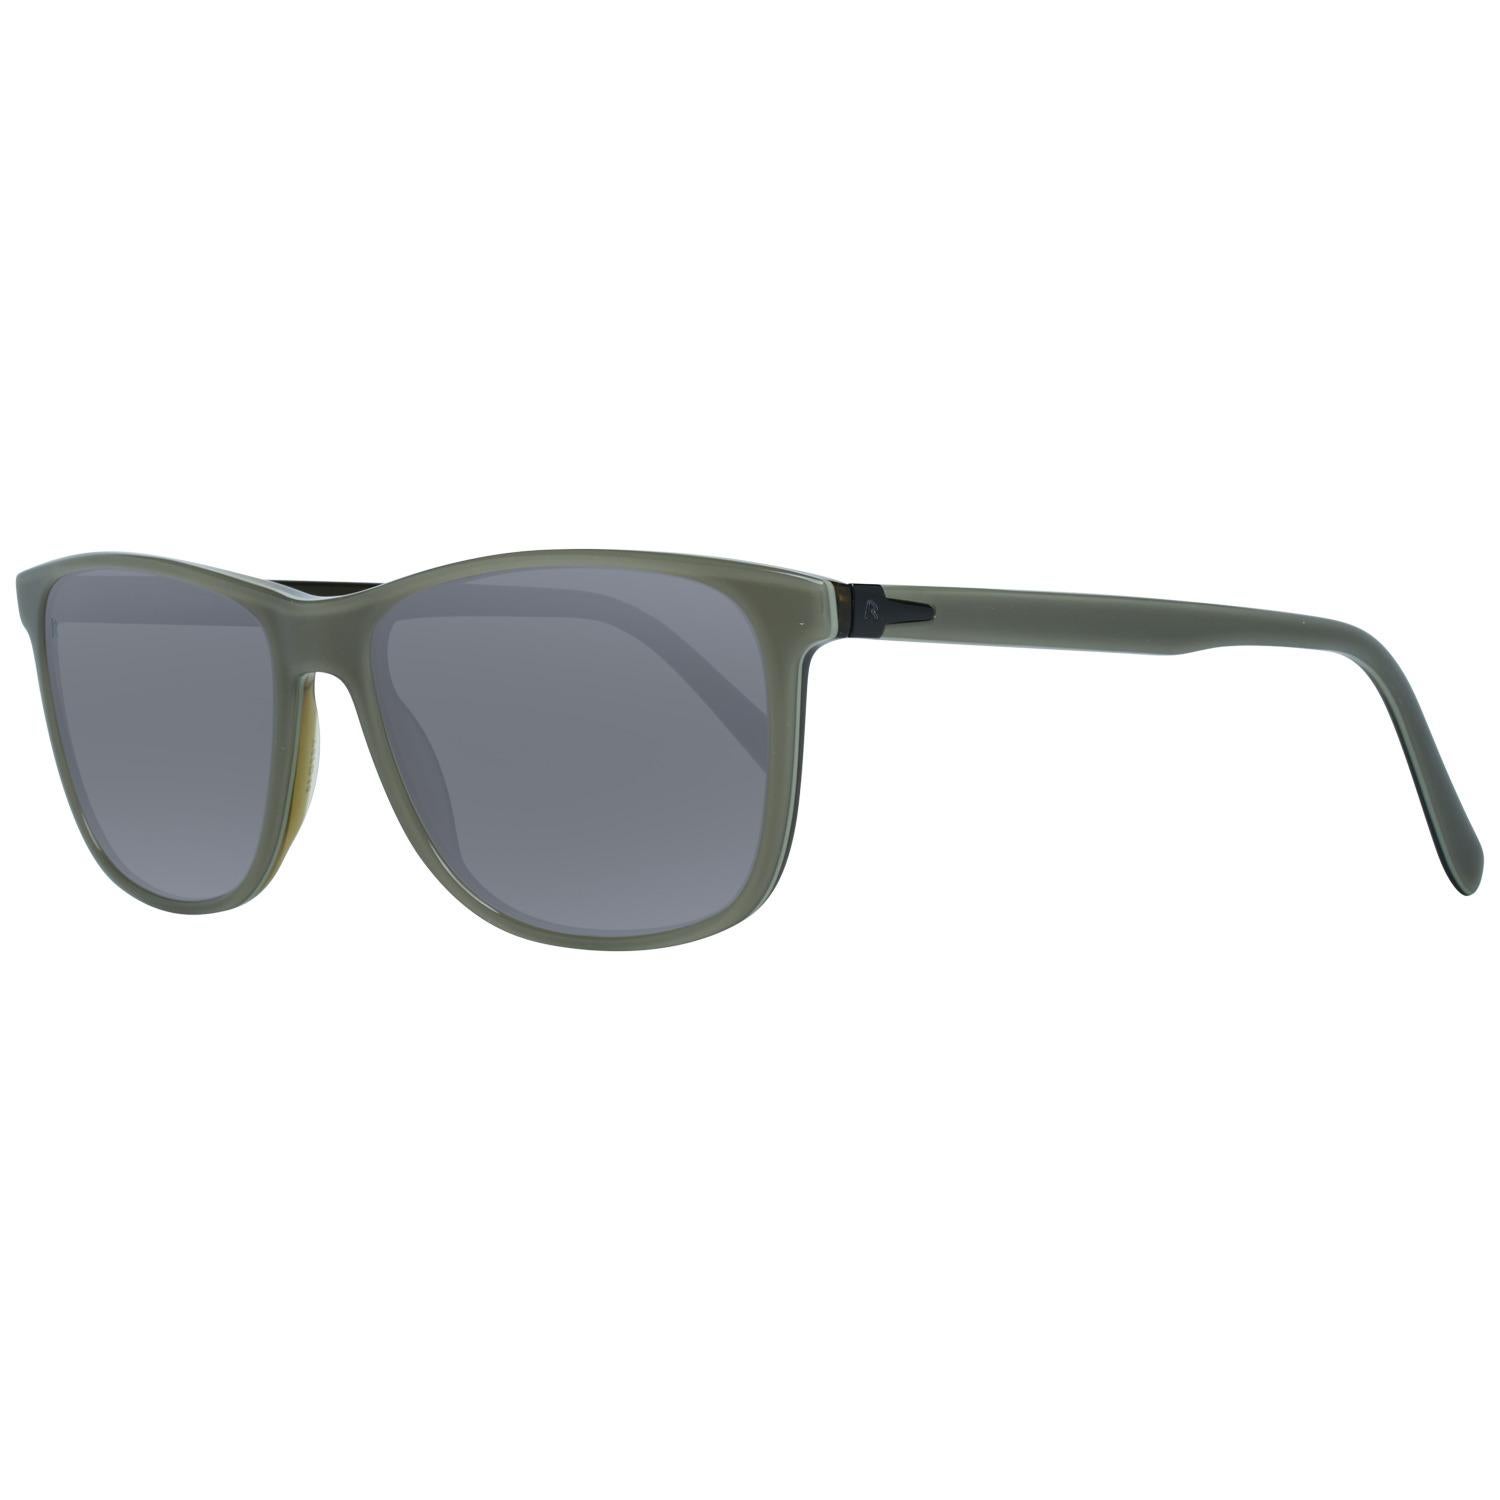 Details

MATERIAL: Acetate

COLOR: Olive

MODEL: R3281-C-5716-145-V425-E49-POL

GENDER: Adult Unisex

COUNTRY OF MANUFACTURE: China

TYPE: Sunglasses

ORIGINAL CASE?: Yes

STYLE: Oval

OCCASION: Casual

FEATURES: Lightweight

LENS COLOR: Grey

LENS